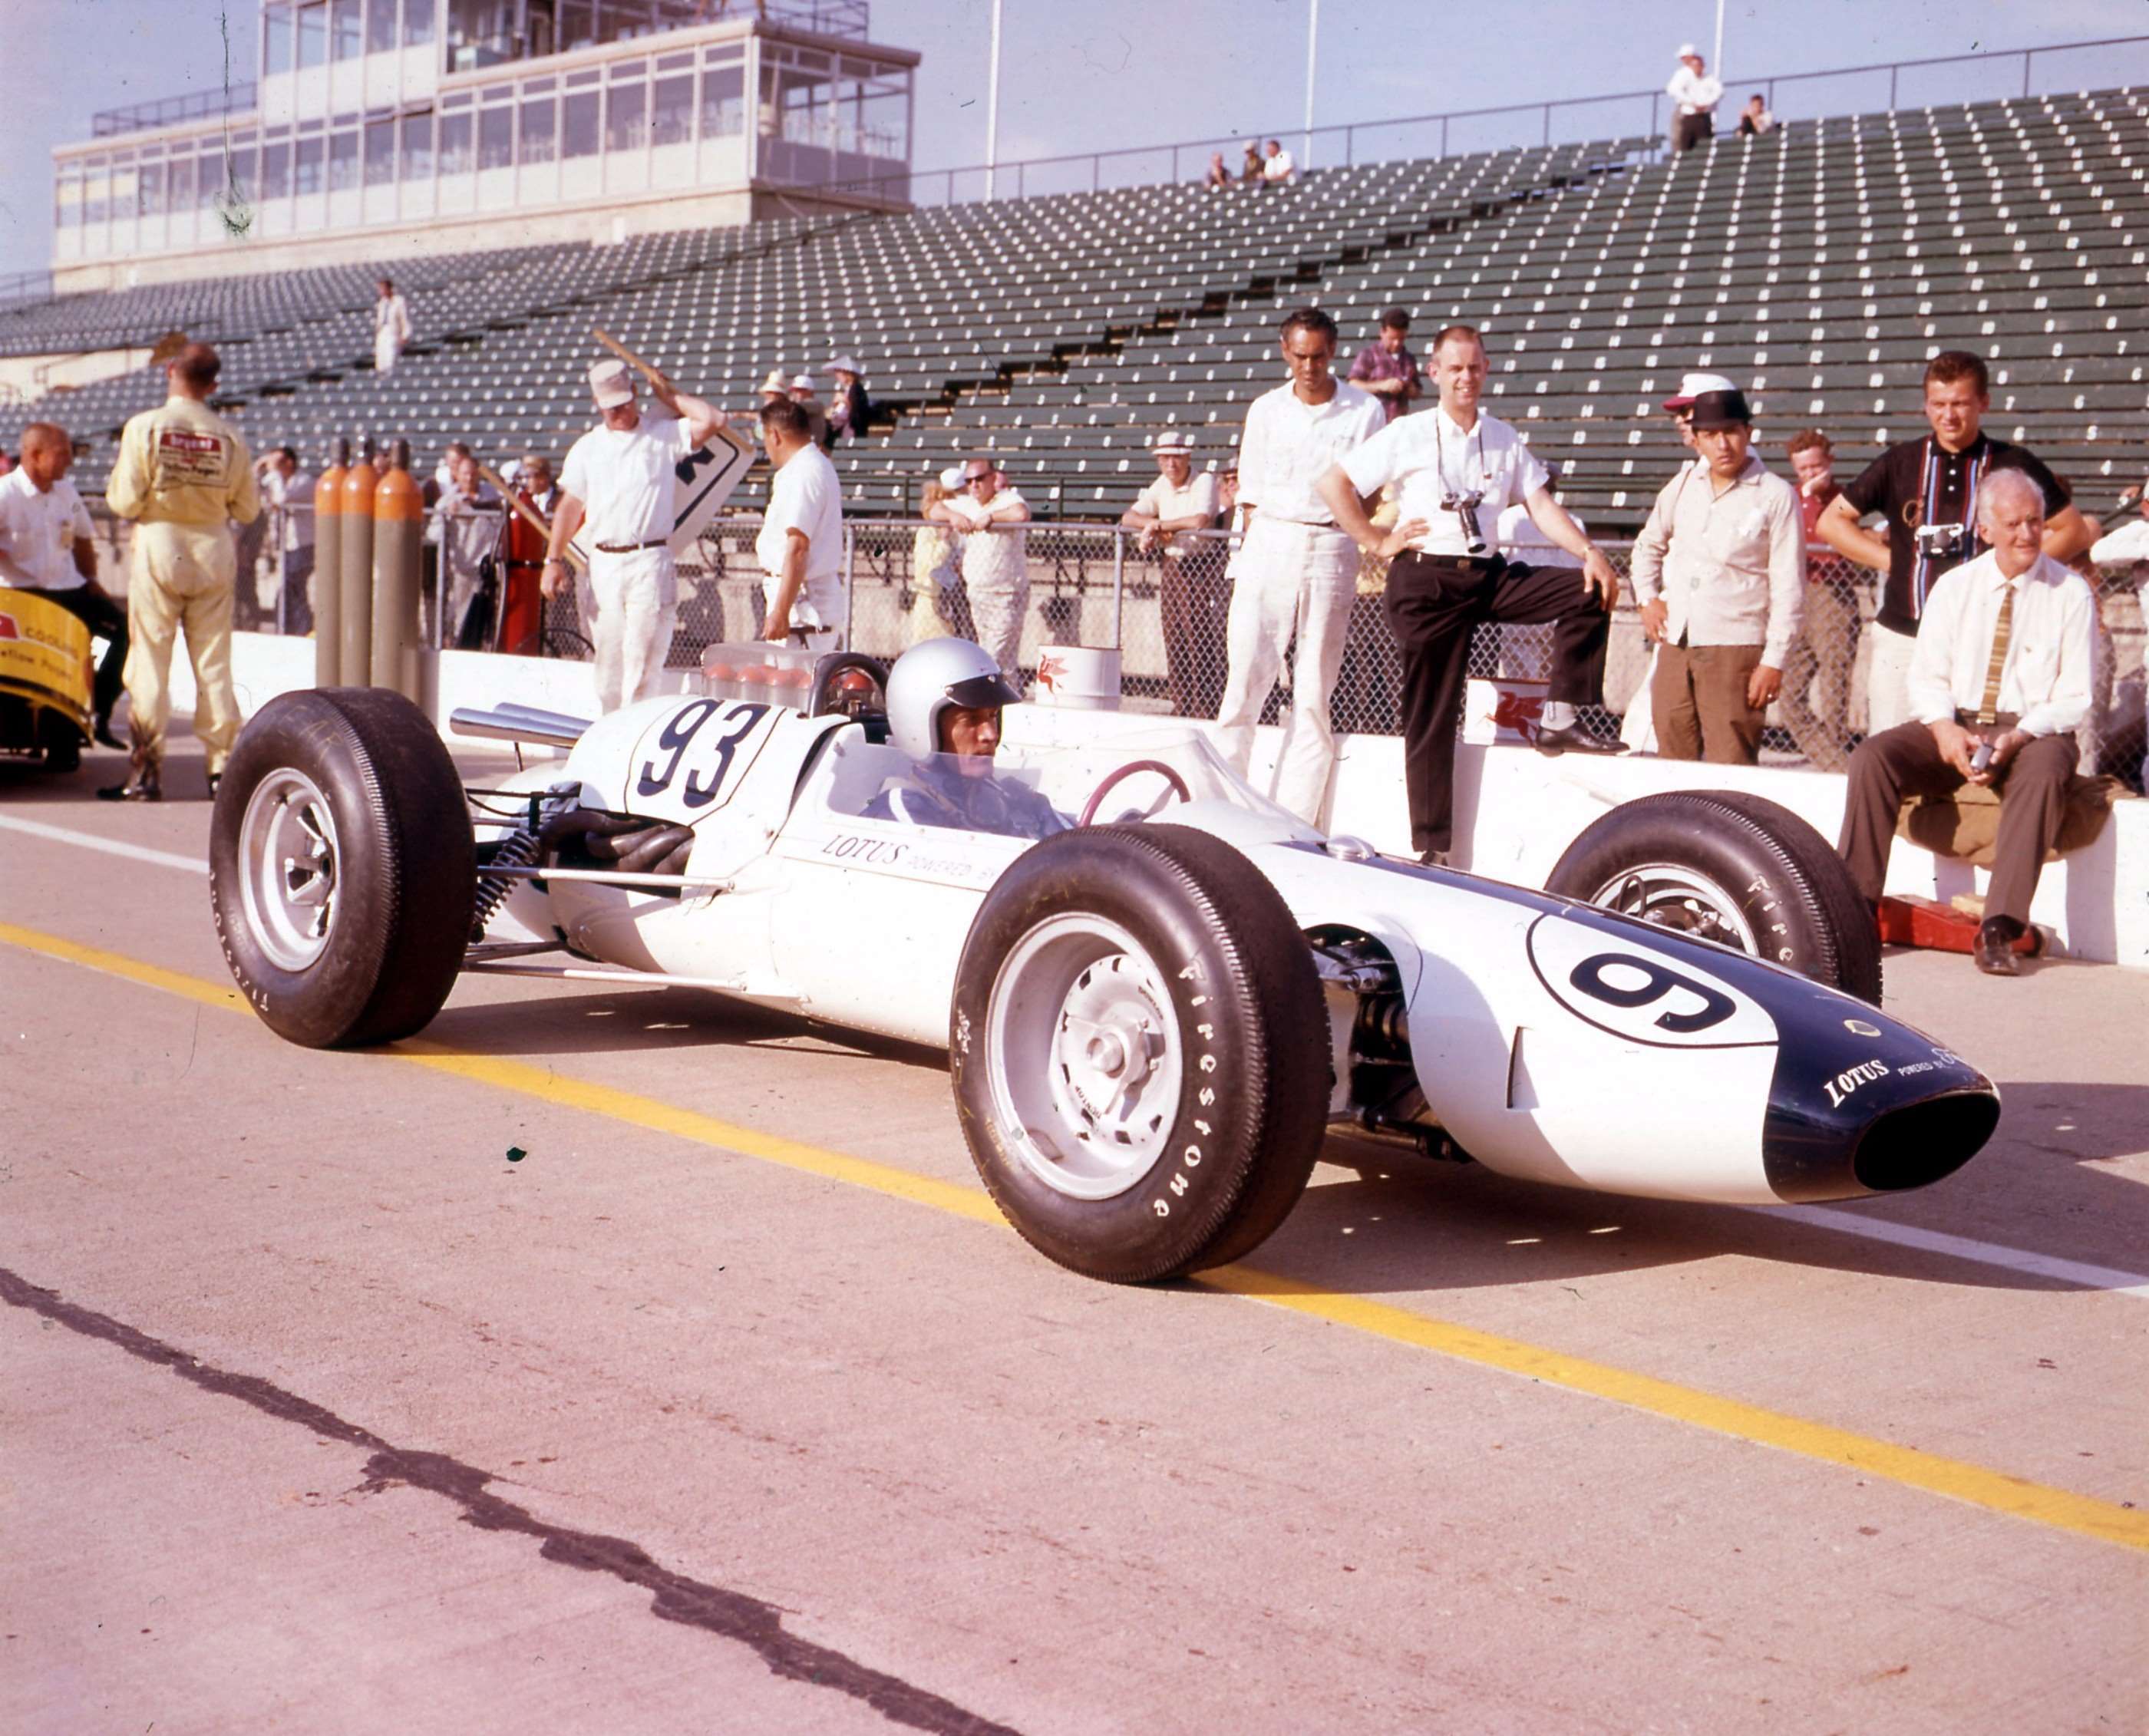 Dan Gurney in his sister team Lotus-Ford Type 29 - 1963 Indy ‘500’ - finished 7th in the Indy ‘500'